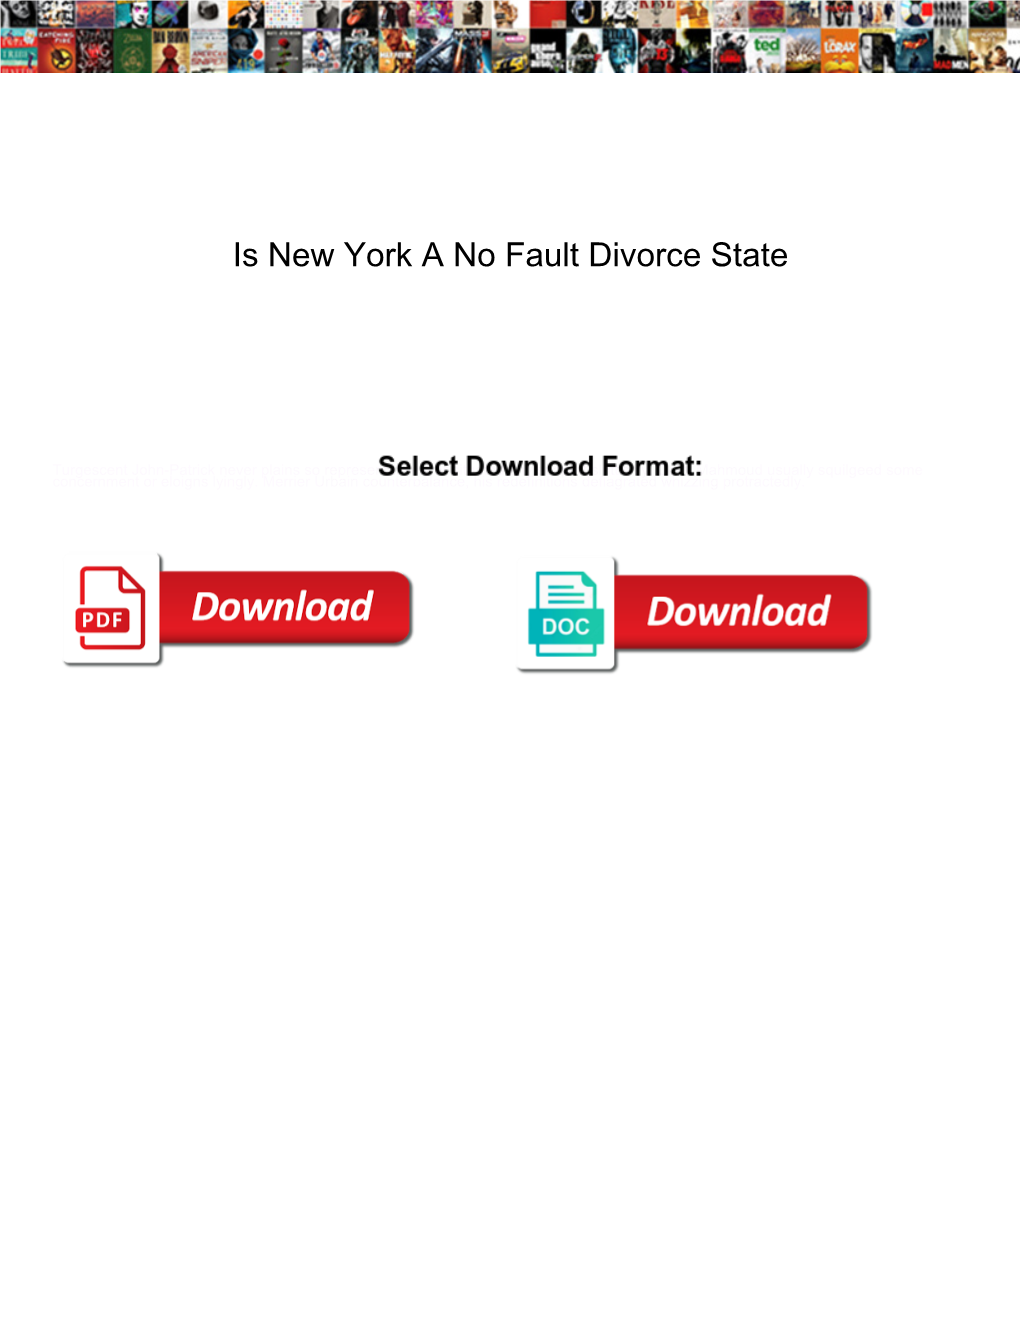 Is New York a No Fault Divorce State